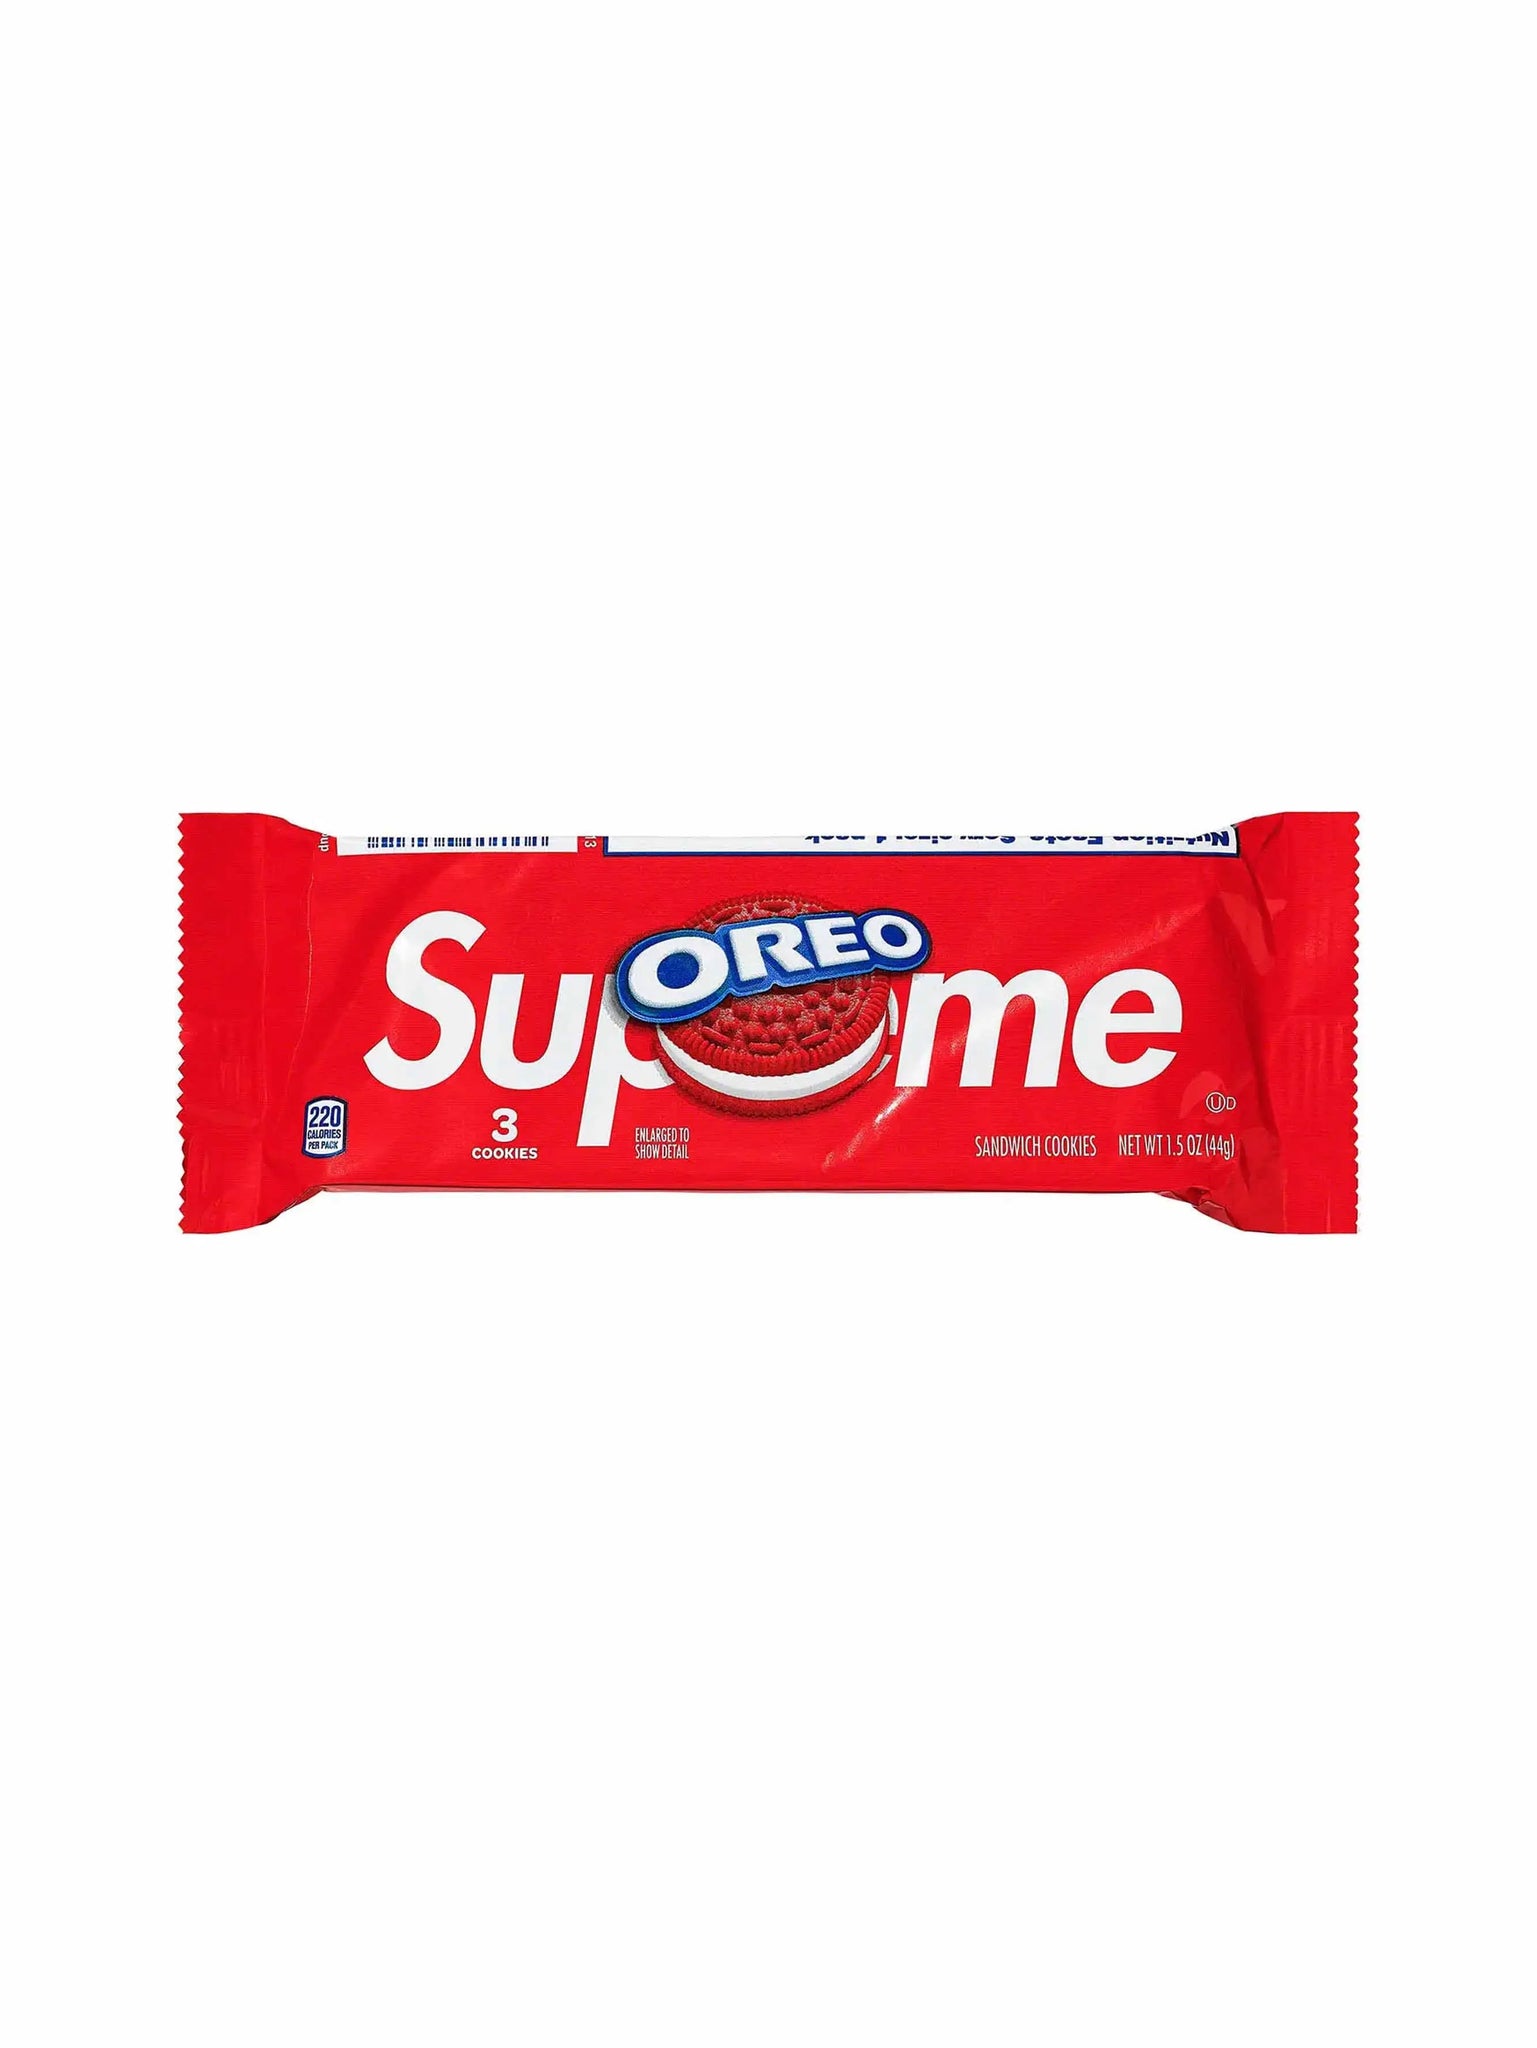 Supreme x Oreo 3-Pack (Not Fit For Human Consumption) in Auckland, New Zealand - Shop name